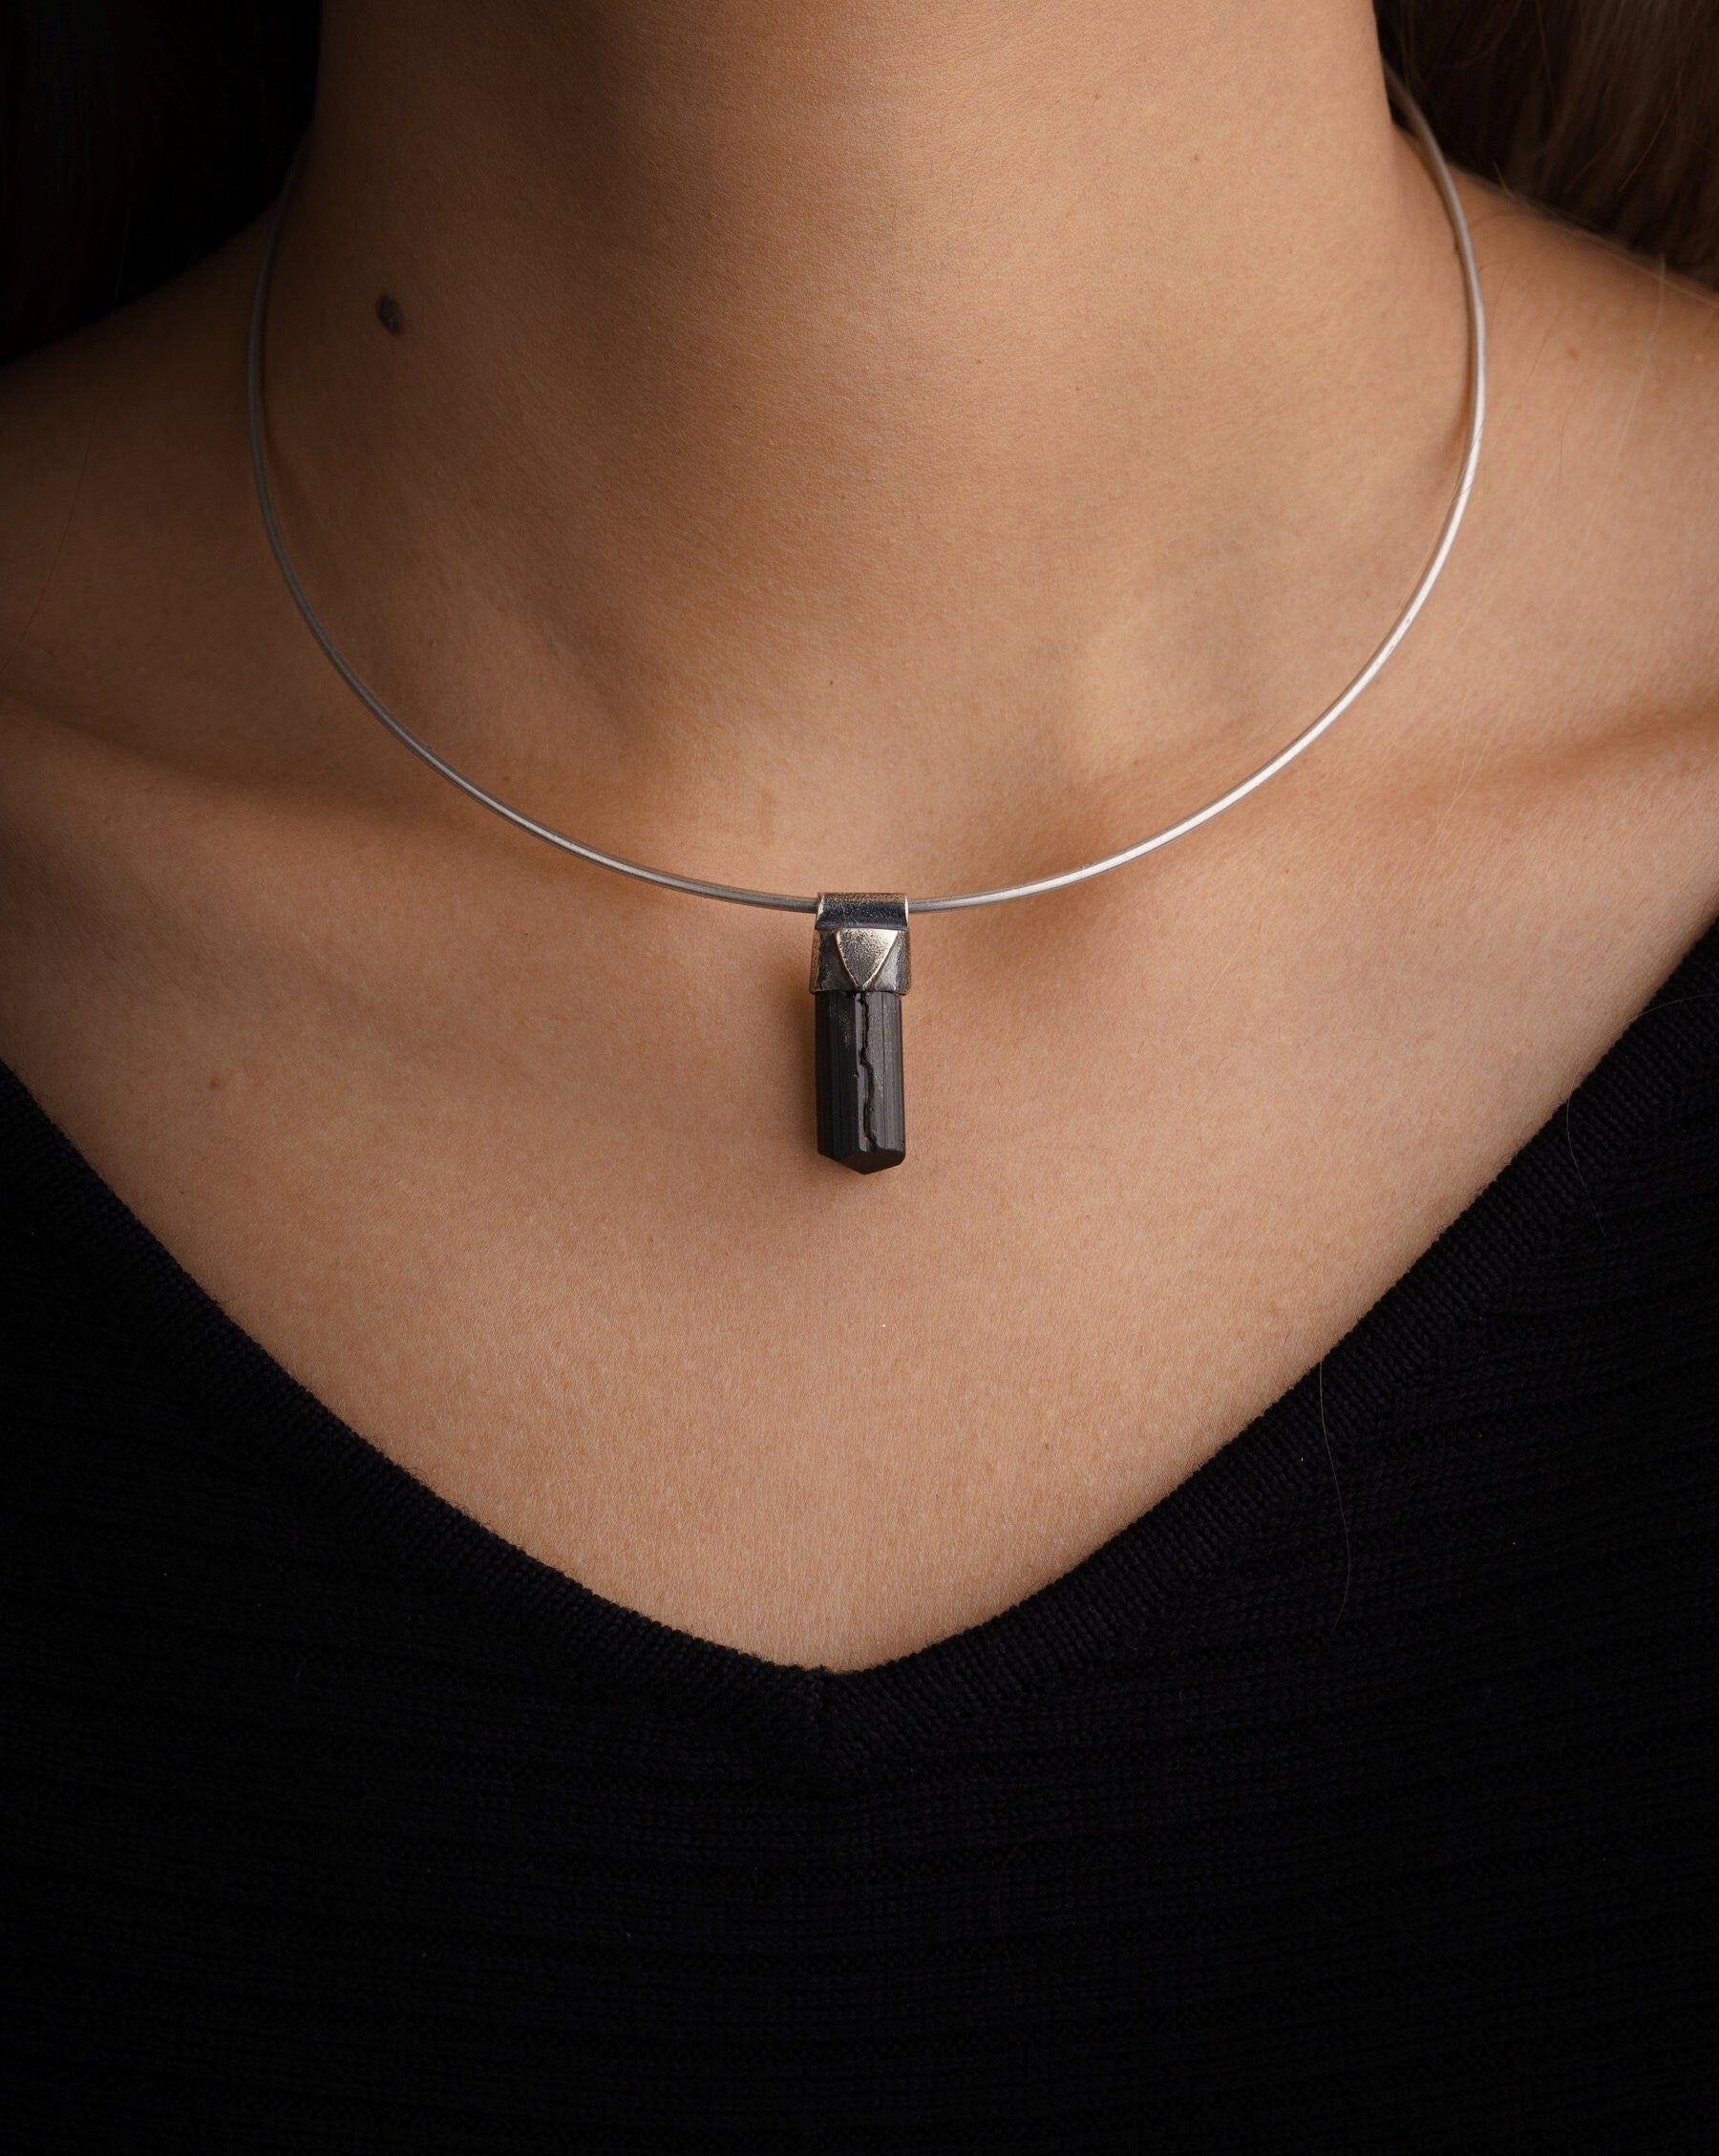 Black Tourmaline Terminated SPECIMEN - Stack Pendant -Textured & Oxidised - 925 Sterling Silver - Crystal Necklace